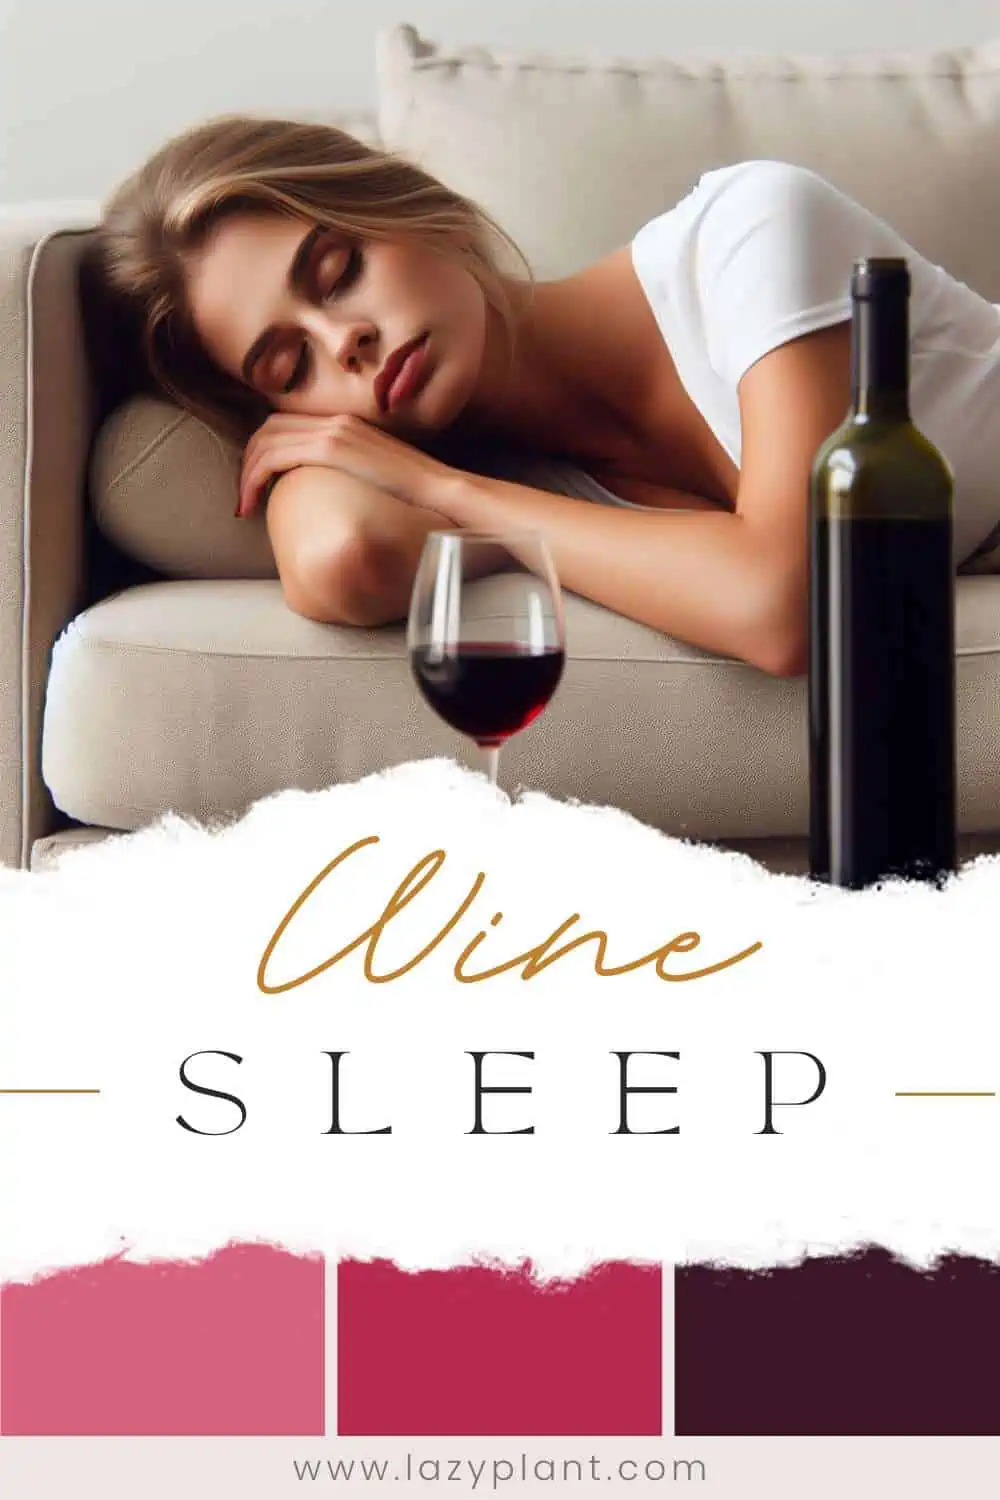 Don’t drink wine before bed.